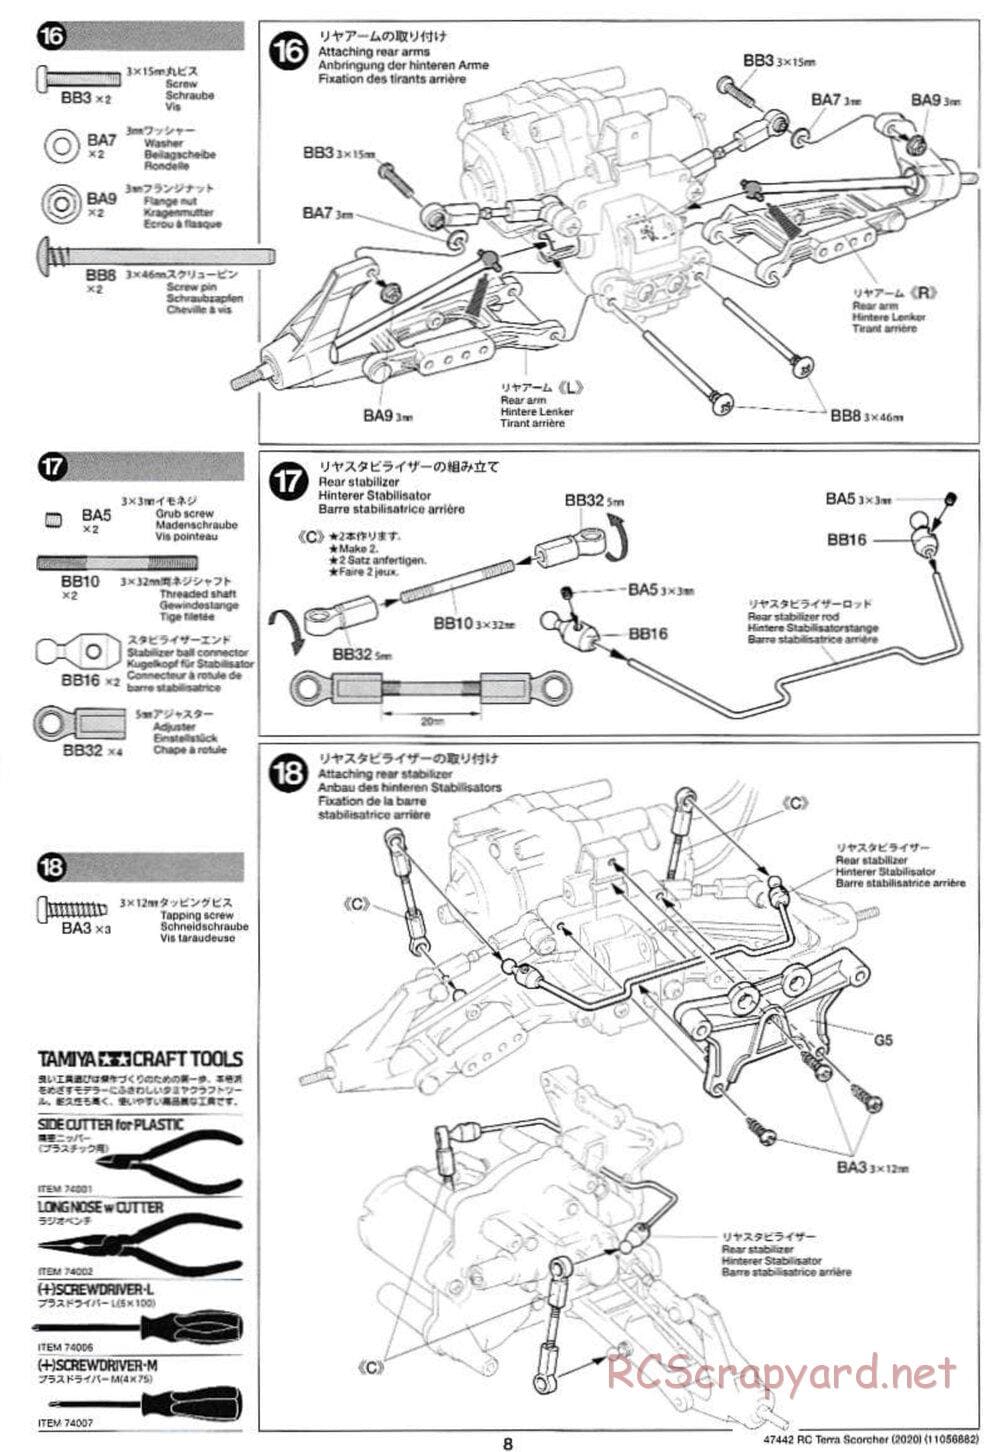 Tamiya - Terra Scorcher 2020 Chassis - Manual - Page 8